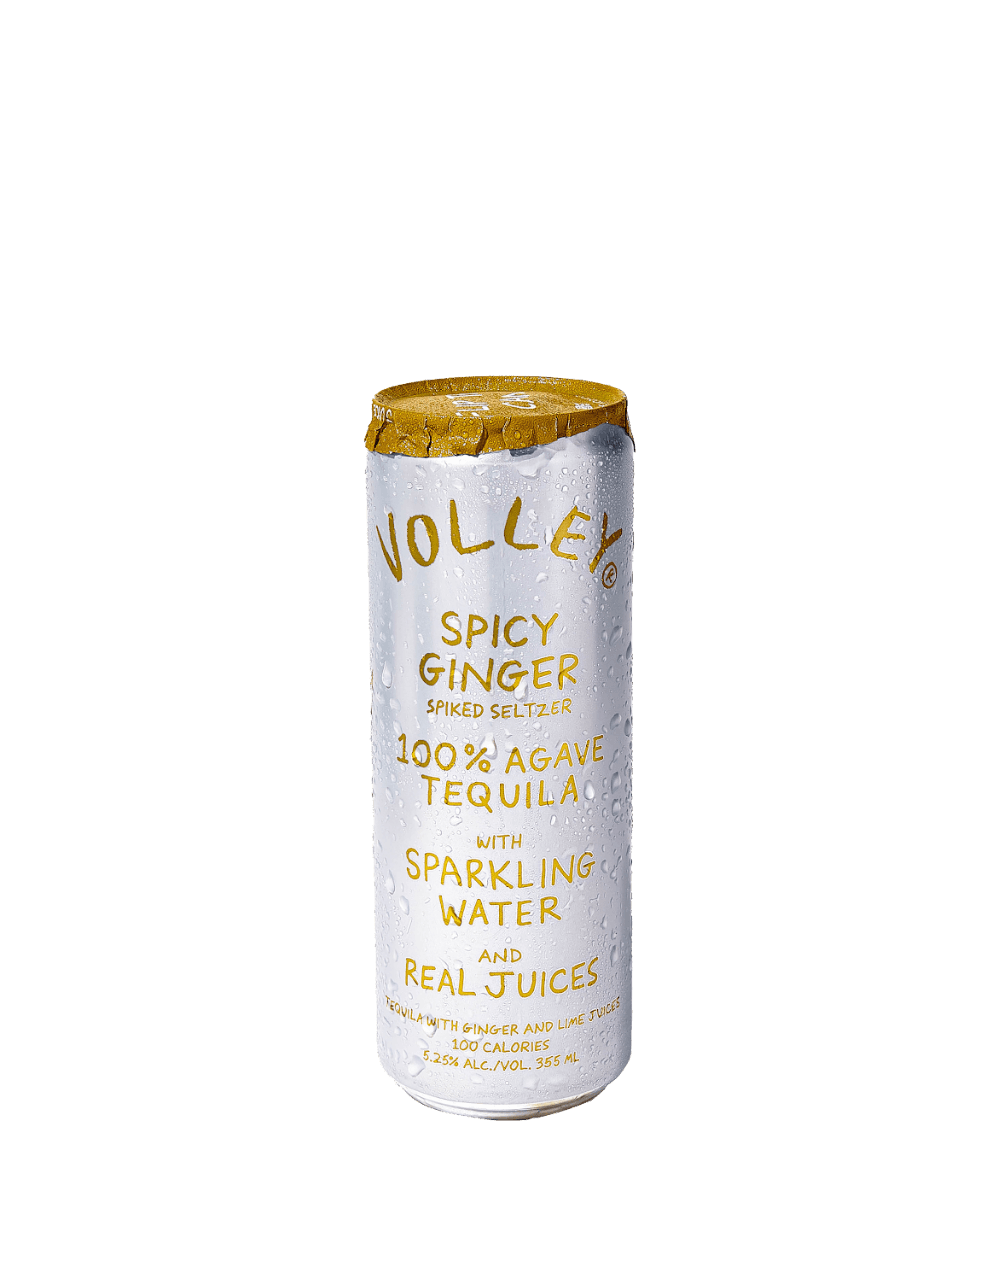 Volley Spicy Ginger Tequila Seltzer